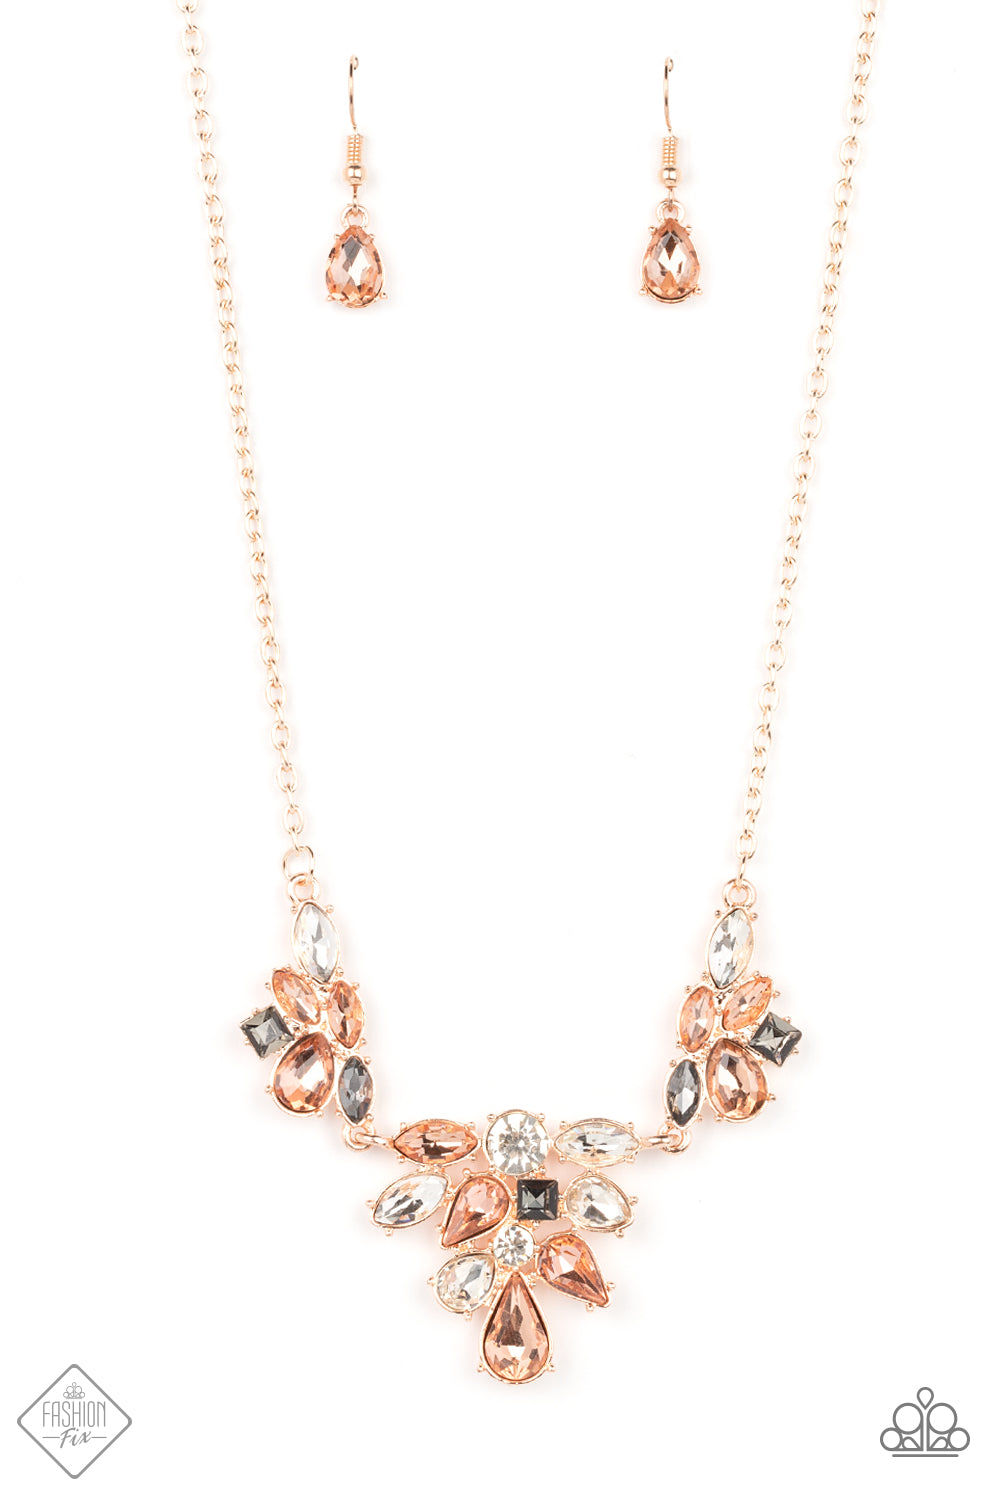 Completely Captivated - Rose Gold Necklace (GM-0422)